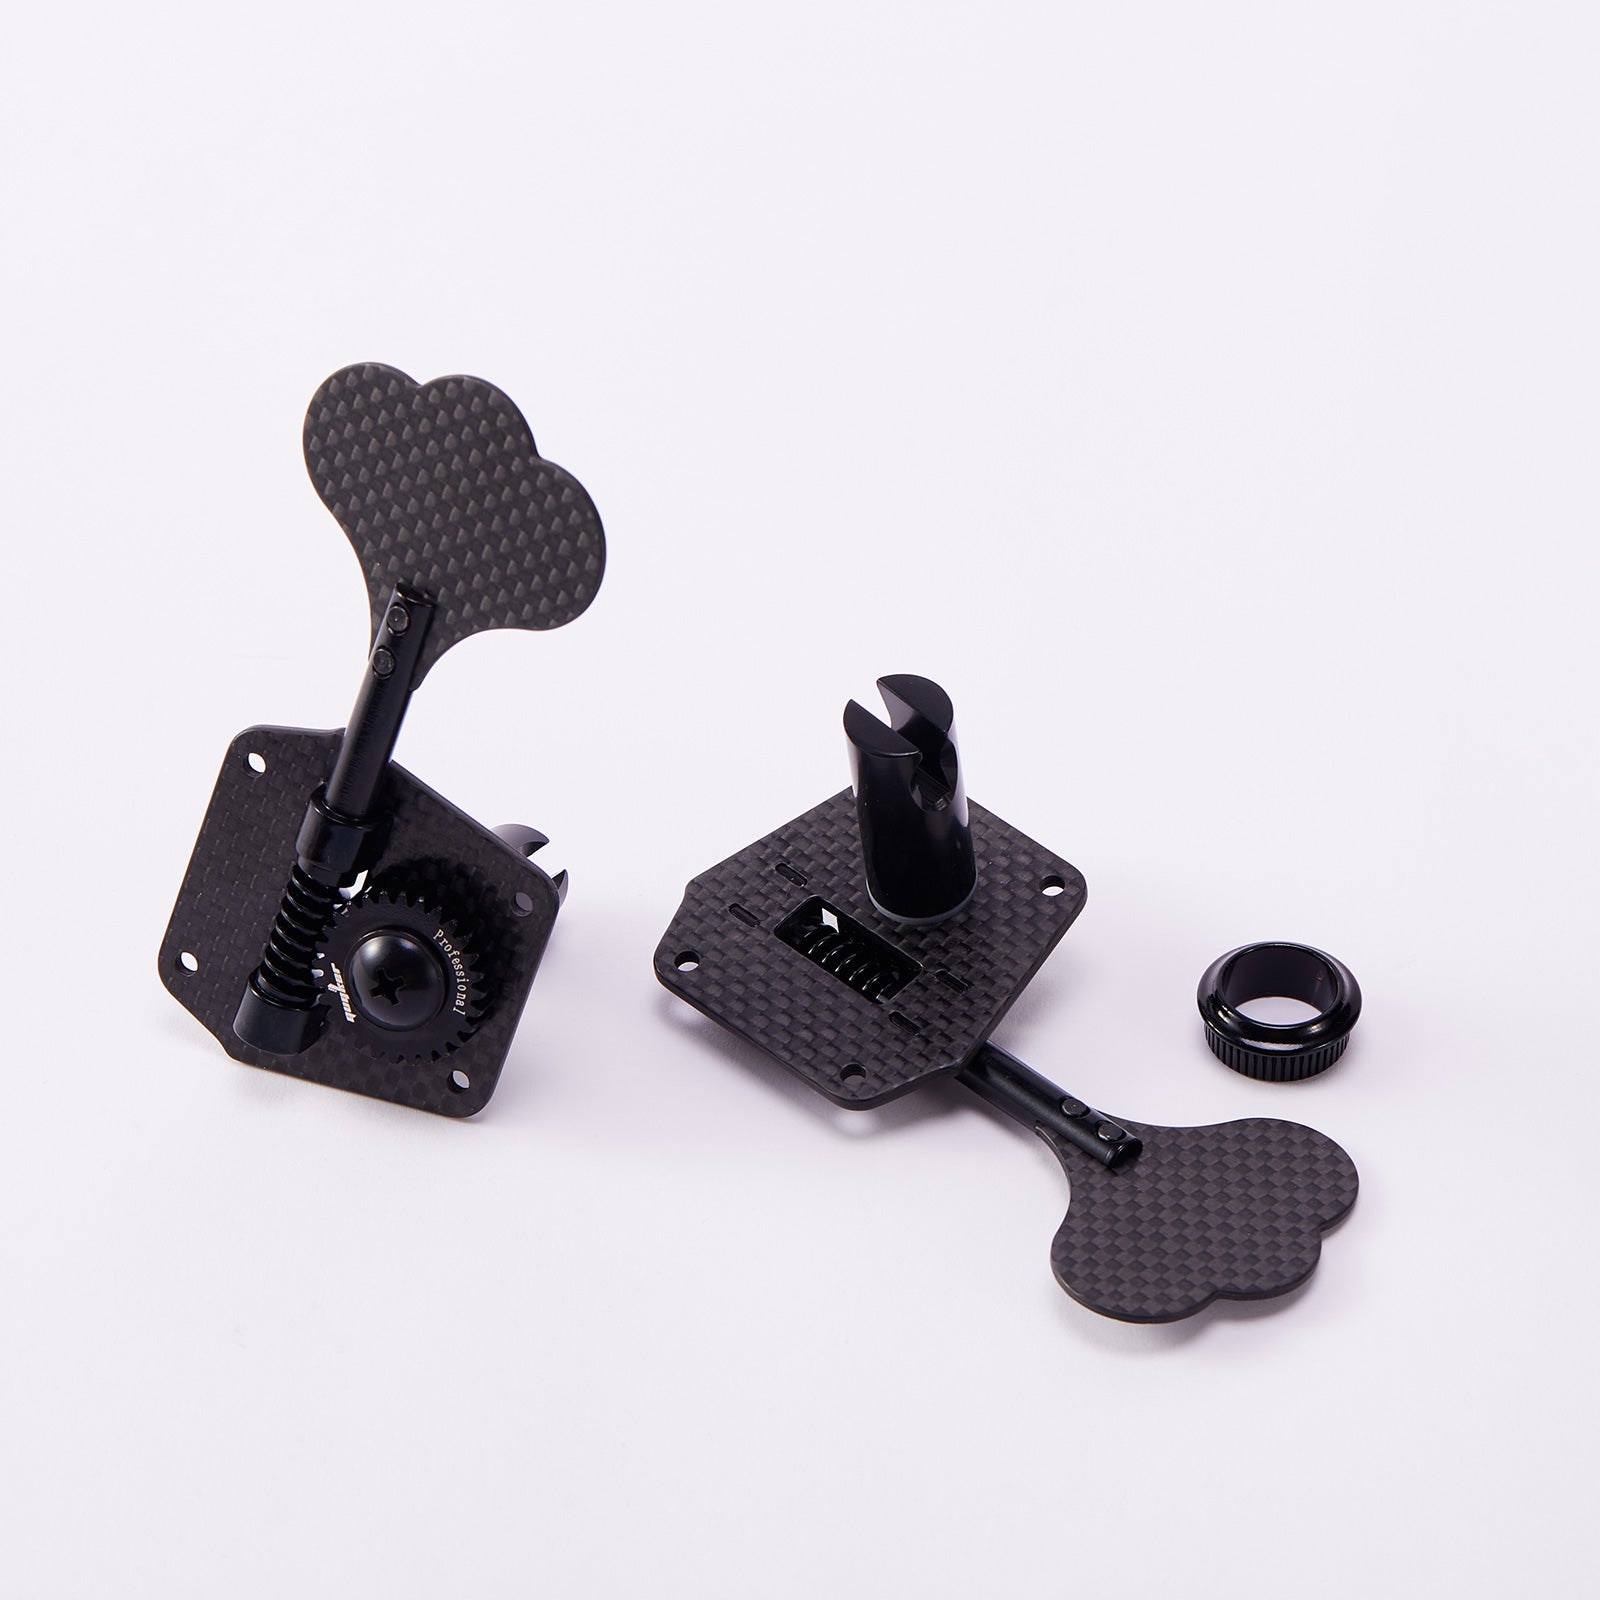 GB-530T Carbon Fiber Tuning Pegs for Bass Gear ratio 1:26